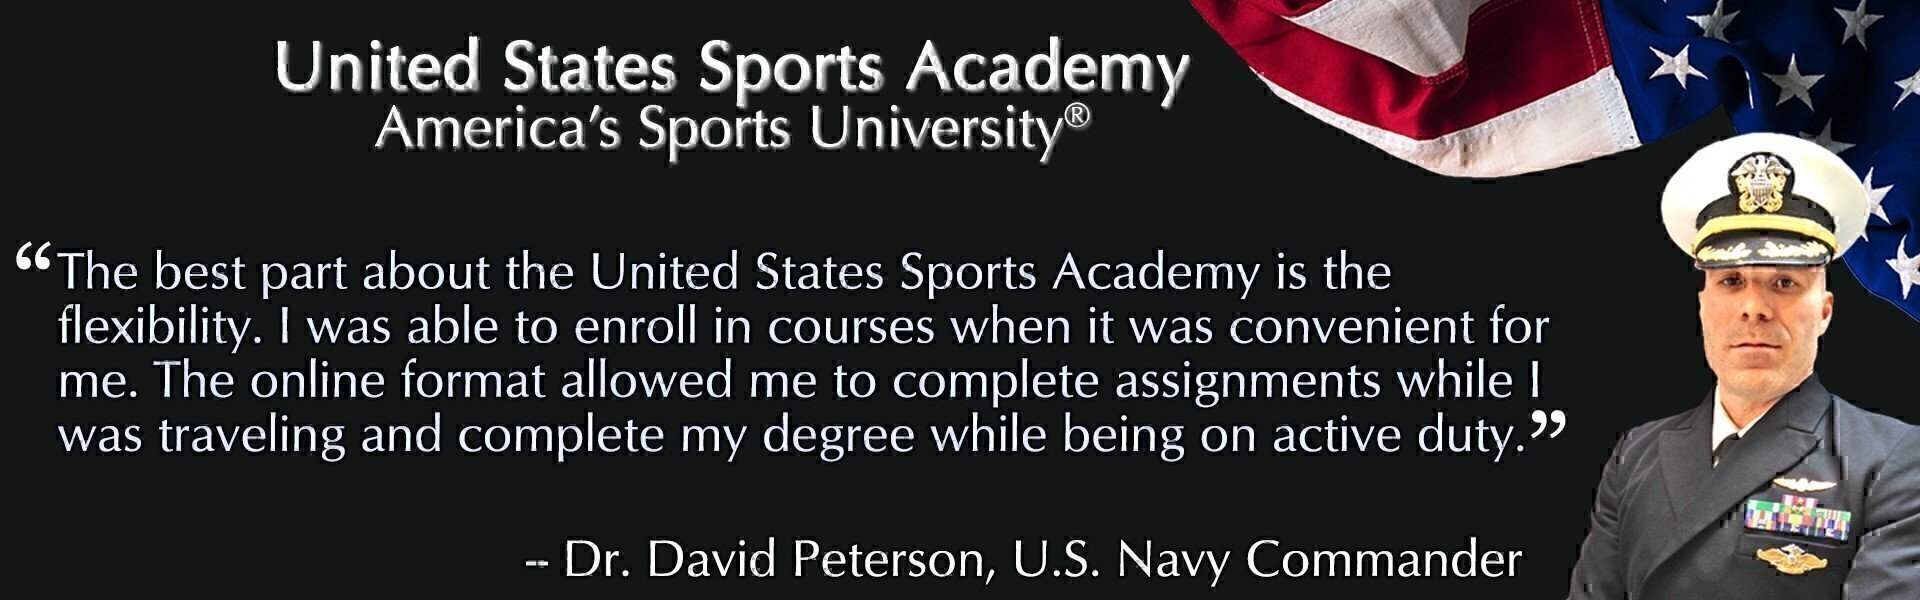 United States Sports Academy Schools for Veterans